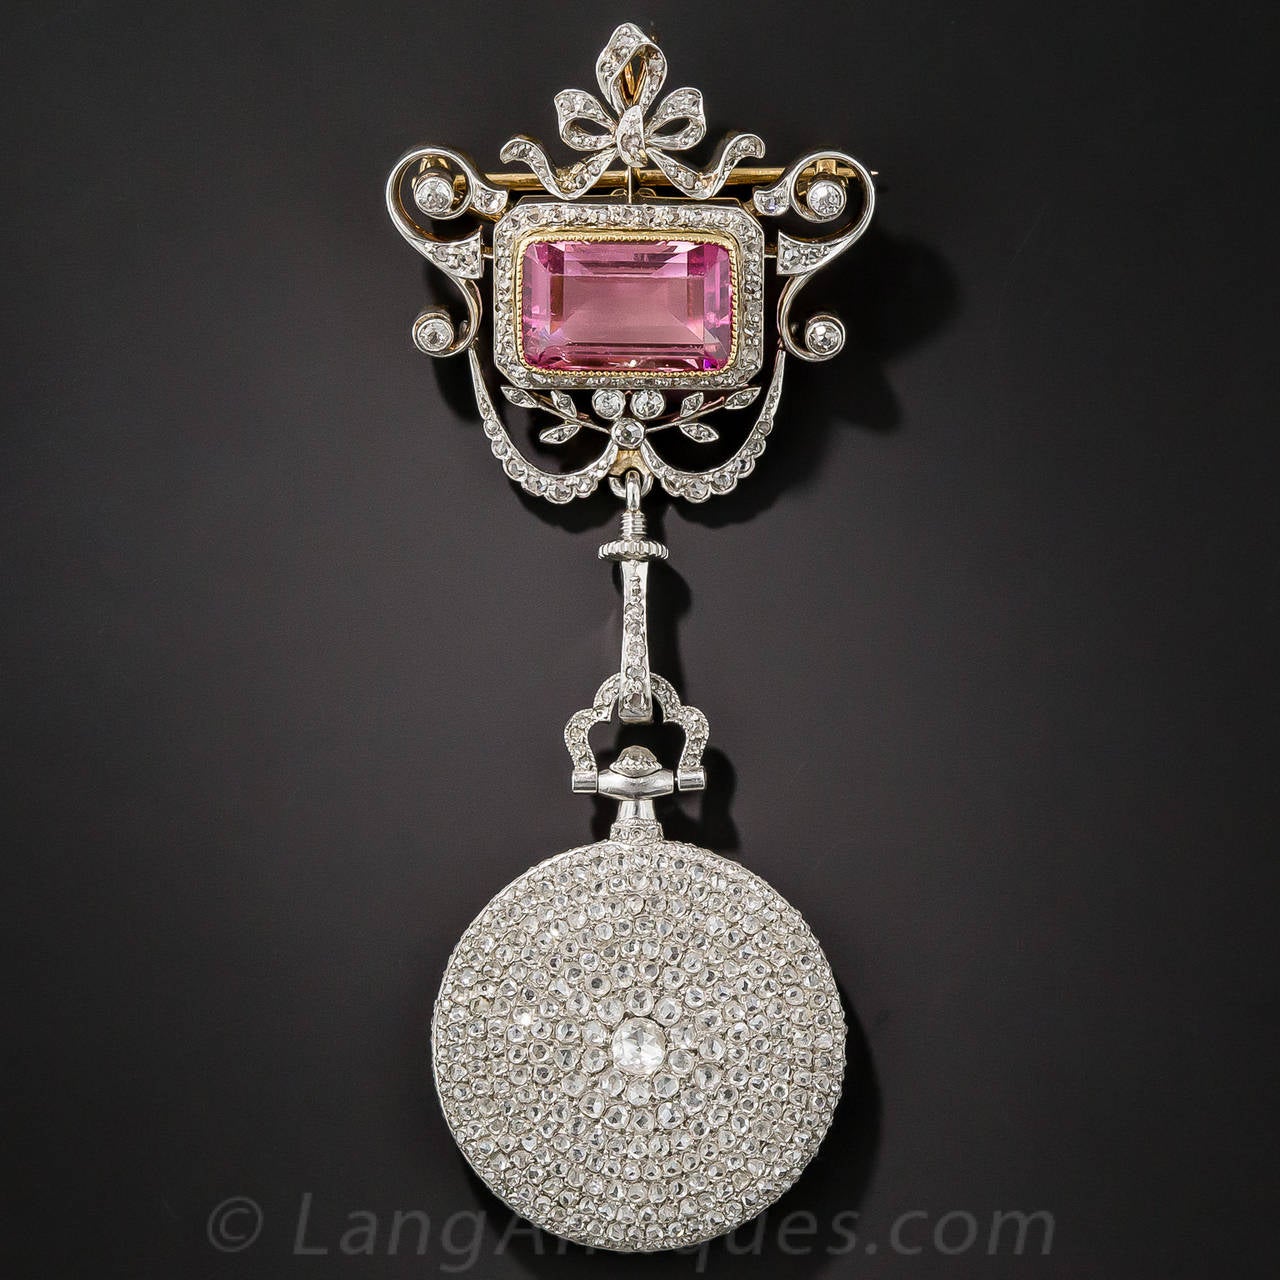 A beautiful marriage was made between this truly magnifique, 1920s Cartier diamond pendant watch and a very complimentary and colorful Edwardian watch pin. The watch itself is, in a word, 'amazing'! About 600 bright-white and sparkling rose-cut